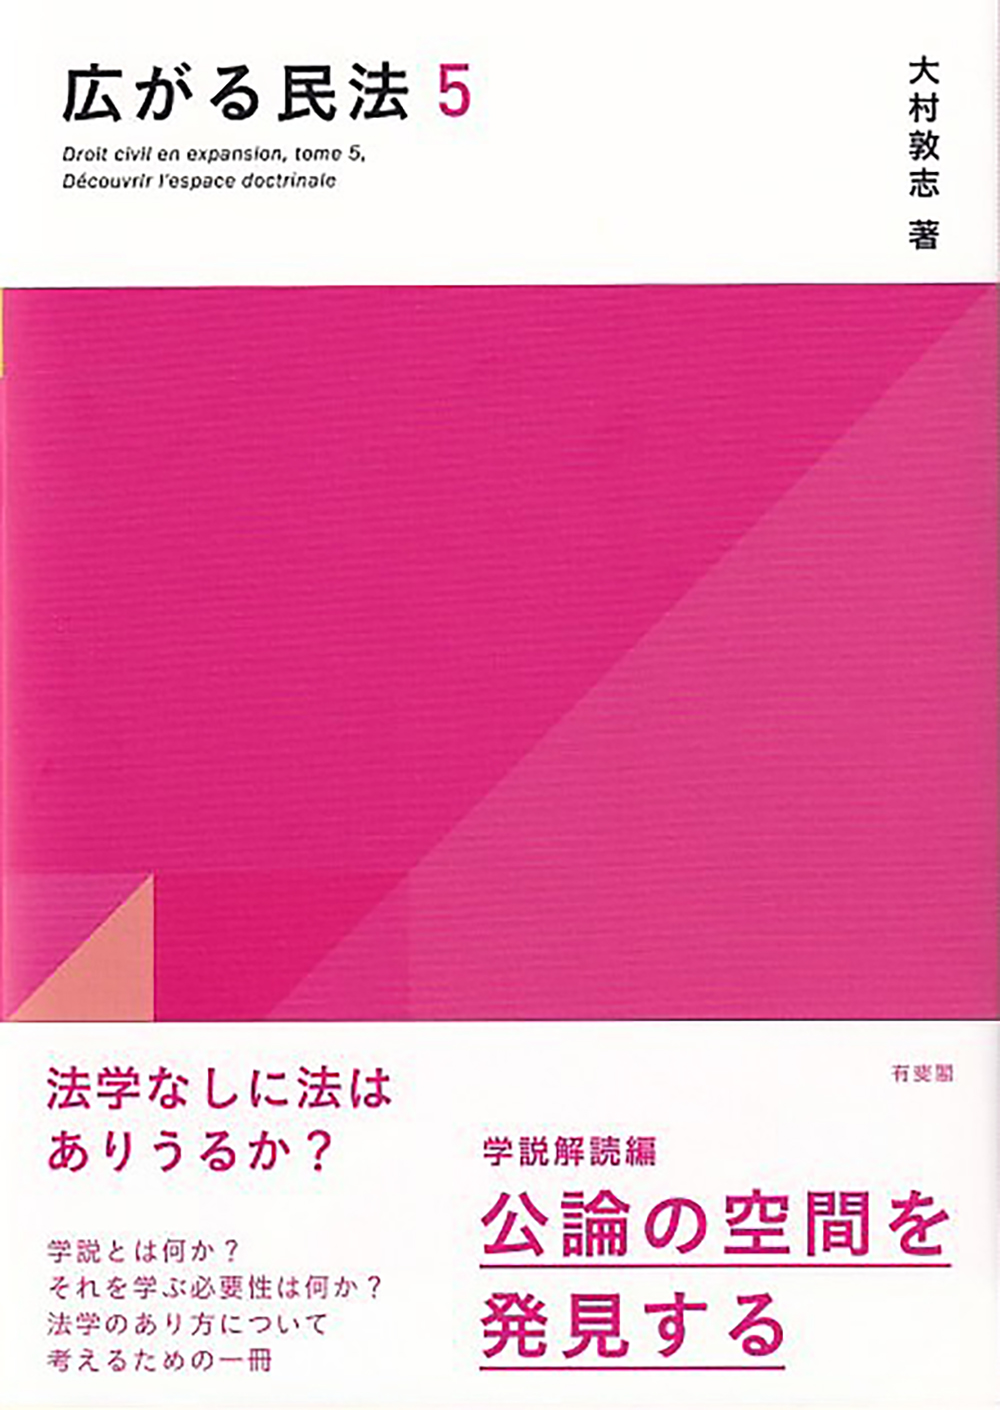 White and passion pink cover